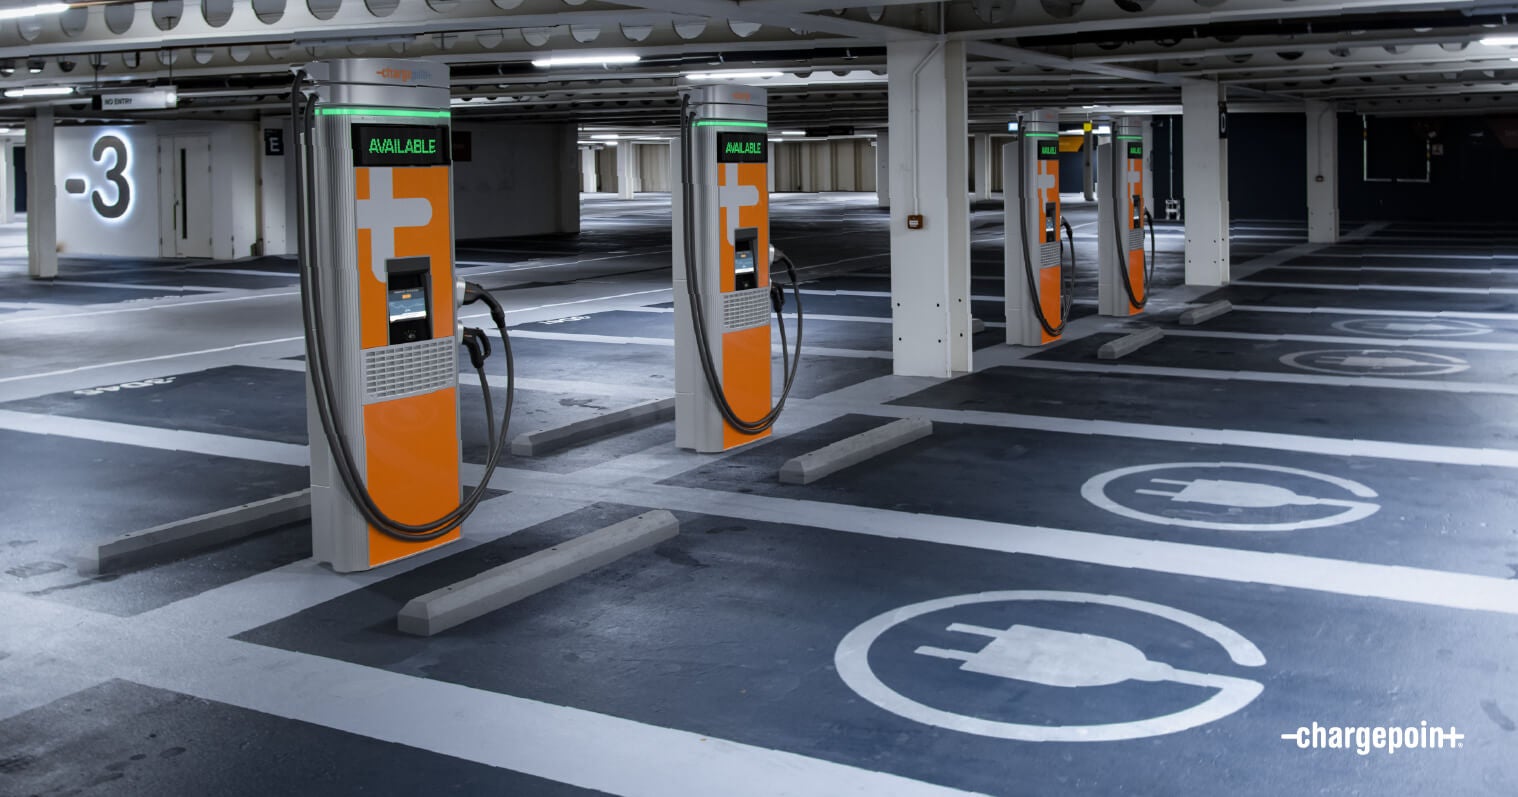 Scale_Blog_Image_Parking_ChargePoints_4_Pillars